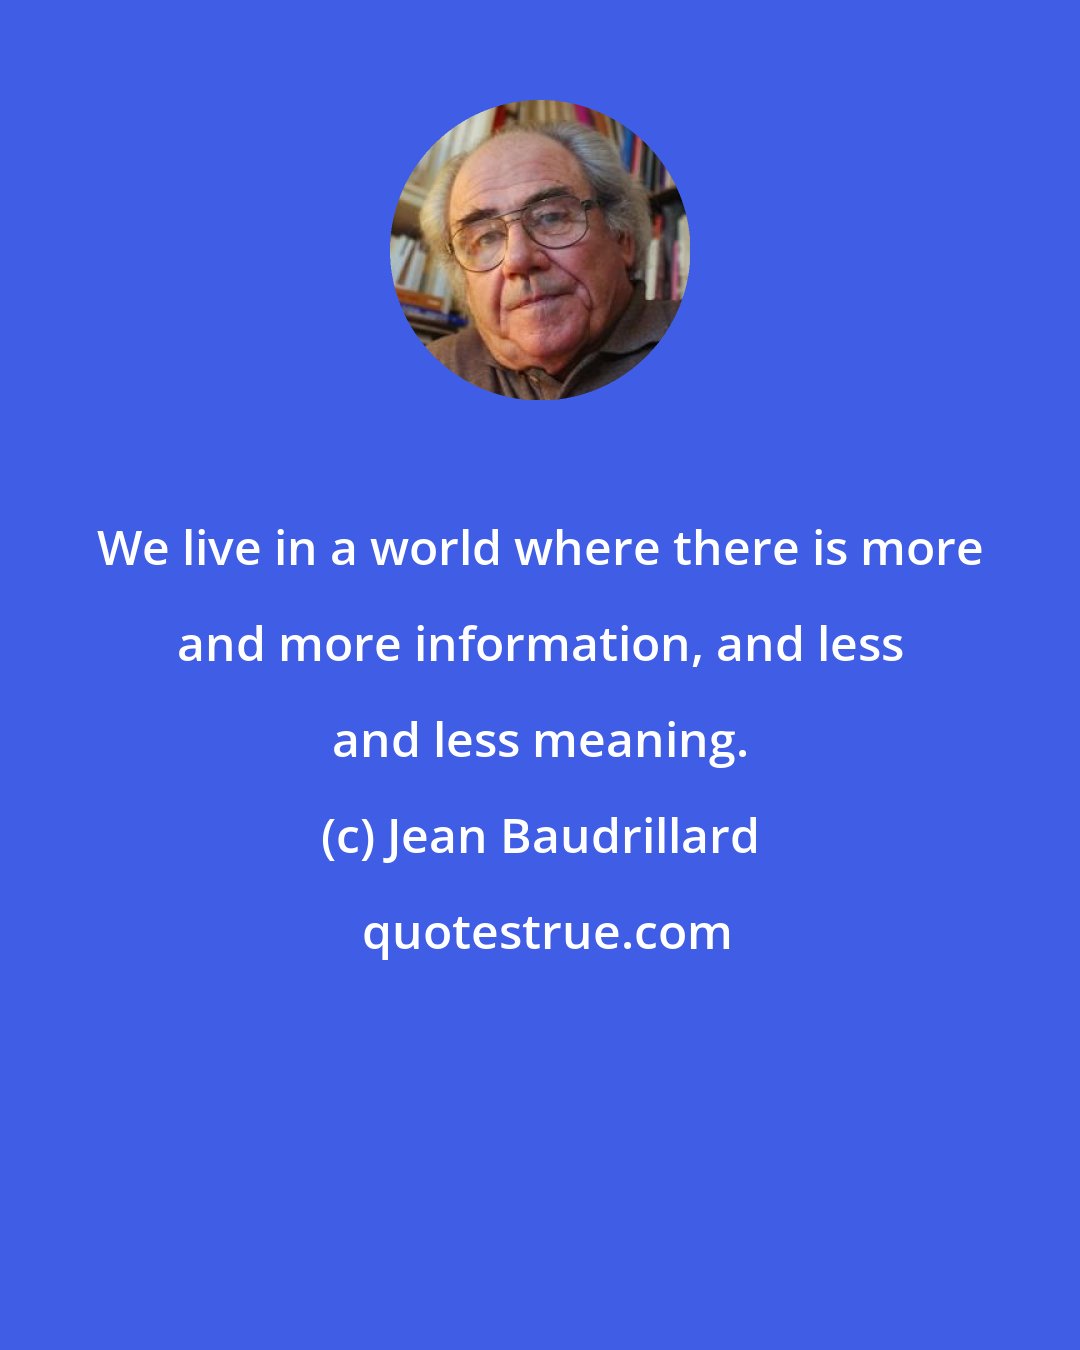 Jean Baudrillard: We live in a world where there is more and more information, and less and less meaning.